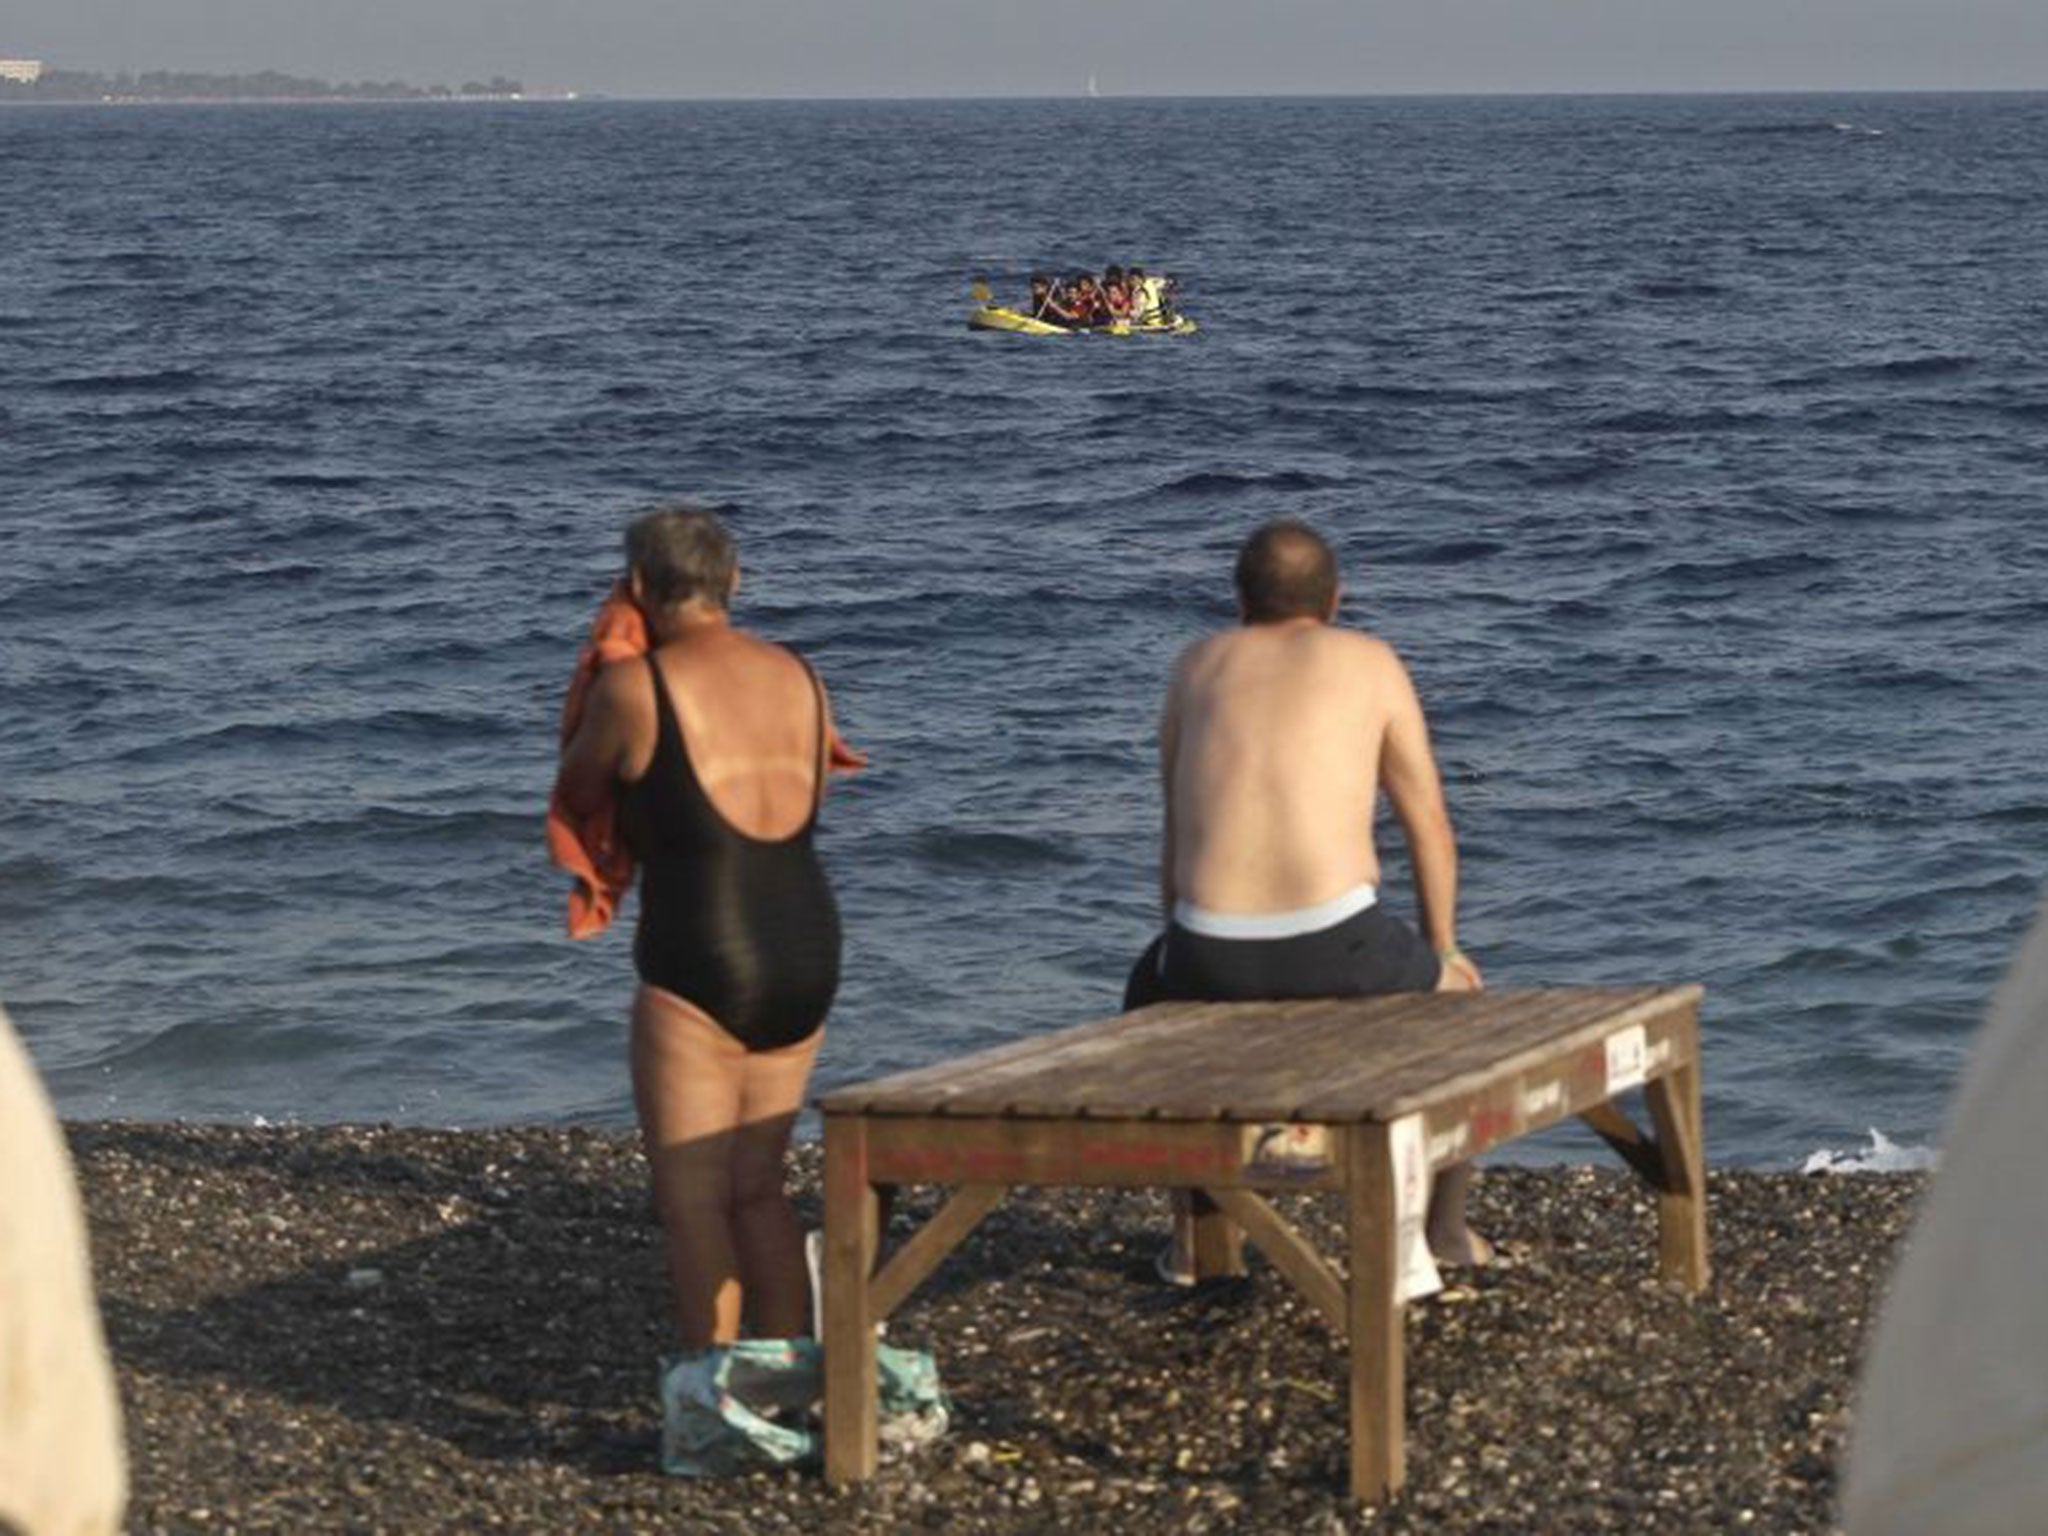 Bathers watch Pakistani migrants as they paddle a dinghy trying to disembark on the coast of Kos August 2015 (EPA)